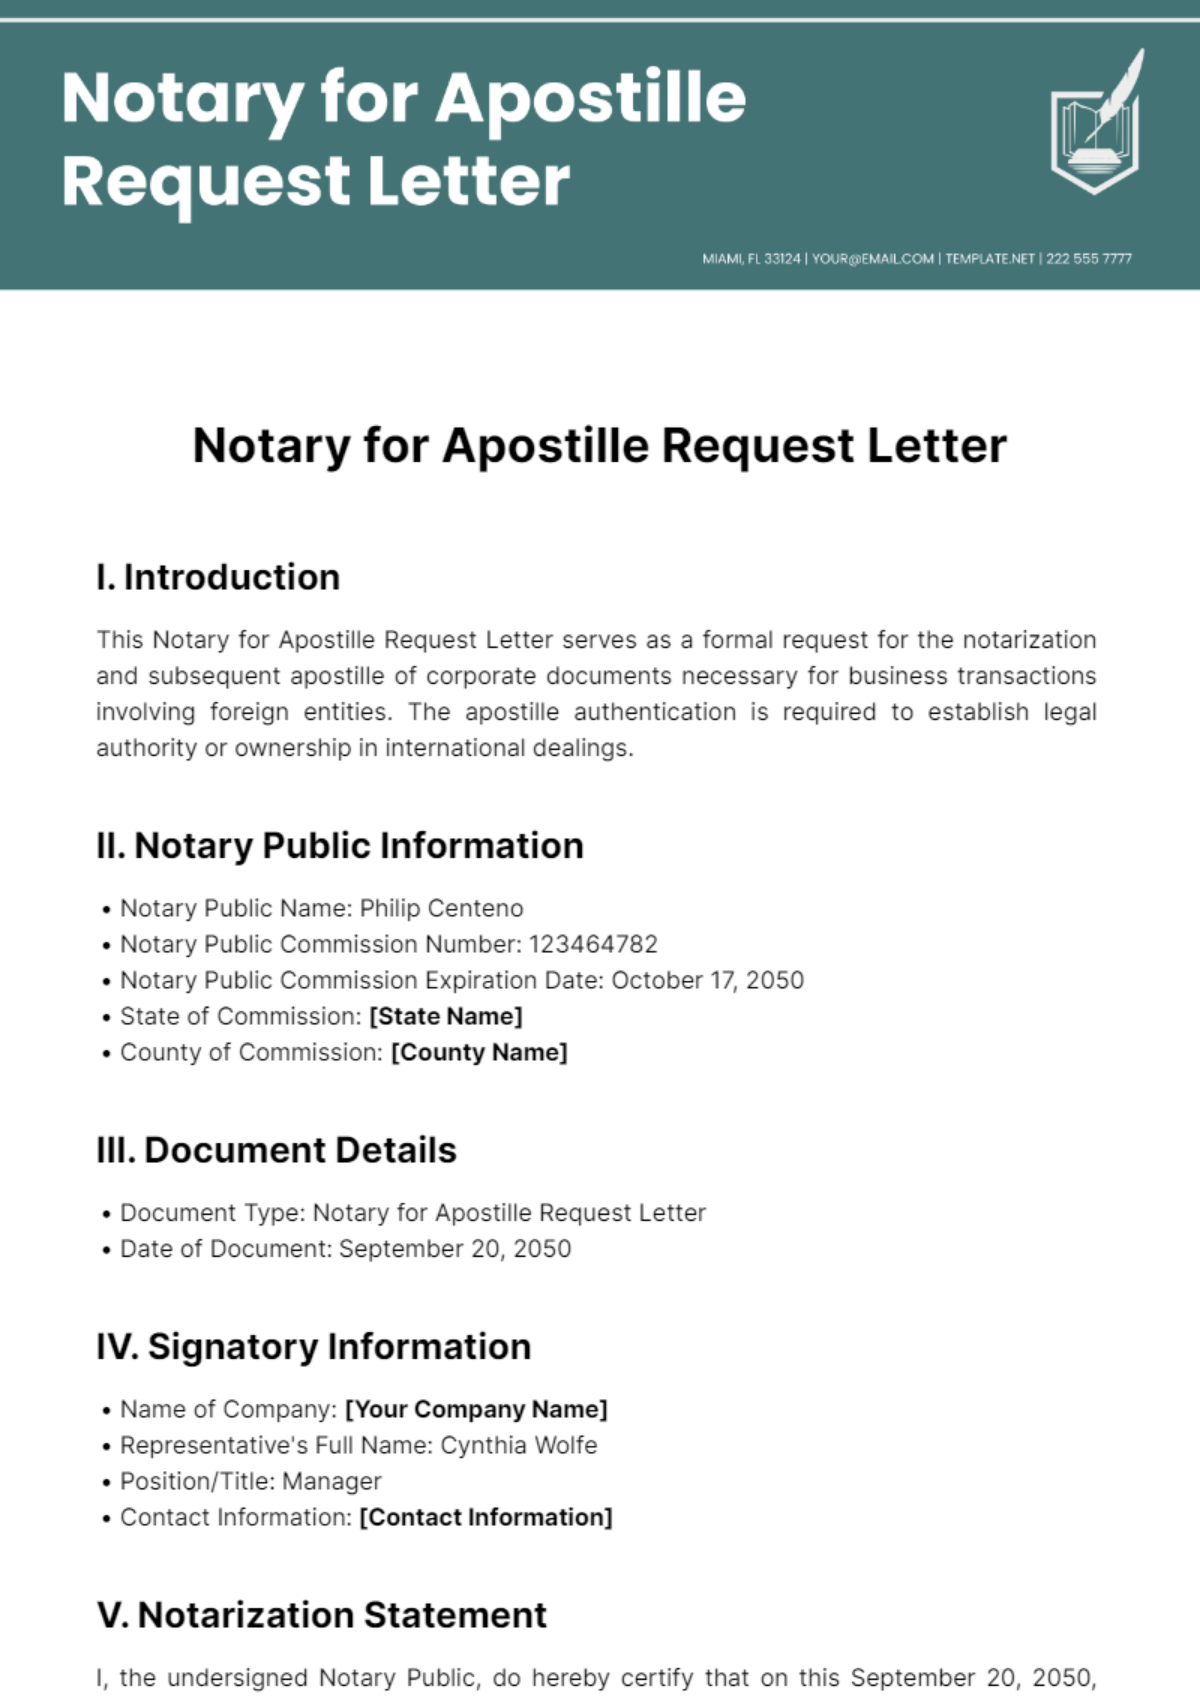 Free Notary for Apostille Request Letter Template